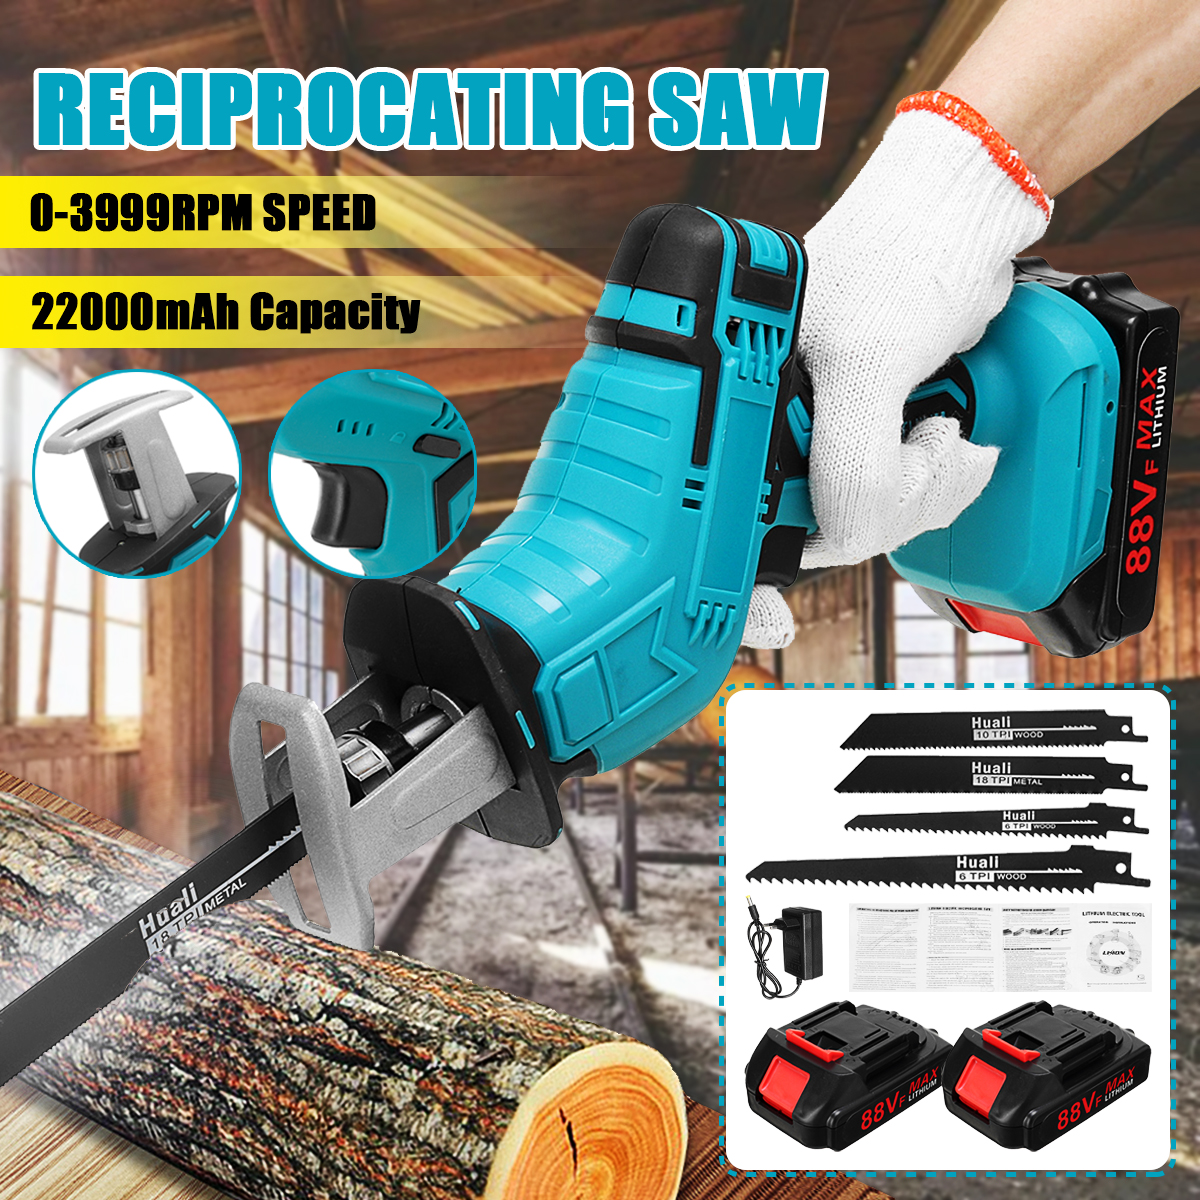 Cordless-Reciprocating-Saw-Woodworking-Wood-Cutter-Electric-Saw-W-None4-Saw-Blades--None12-Battery-C-1873530-1